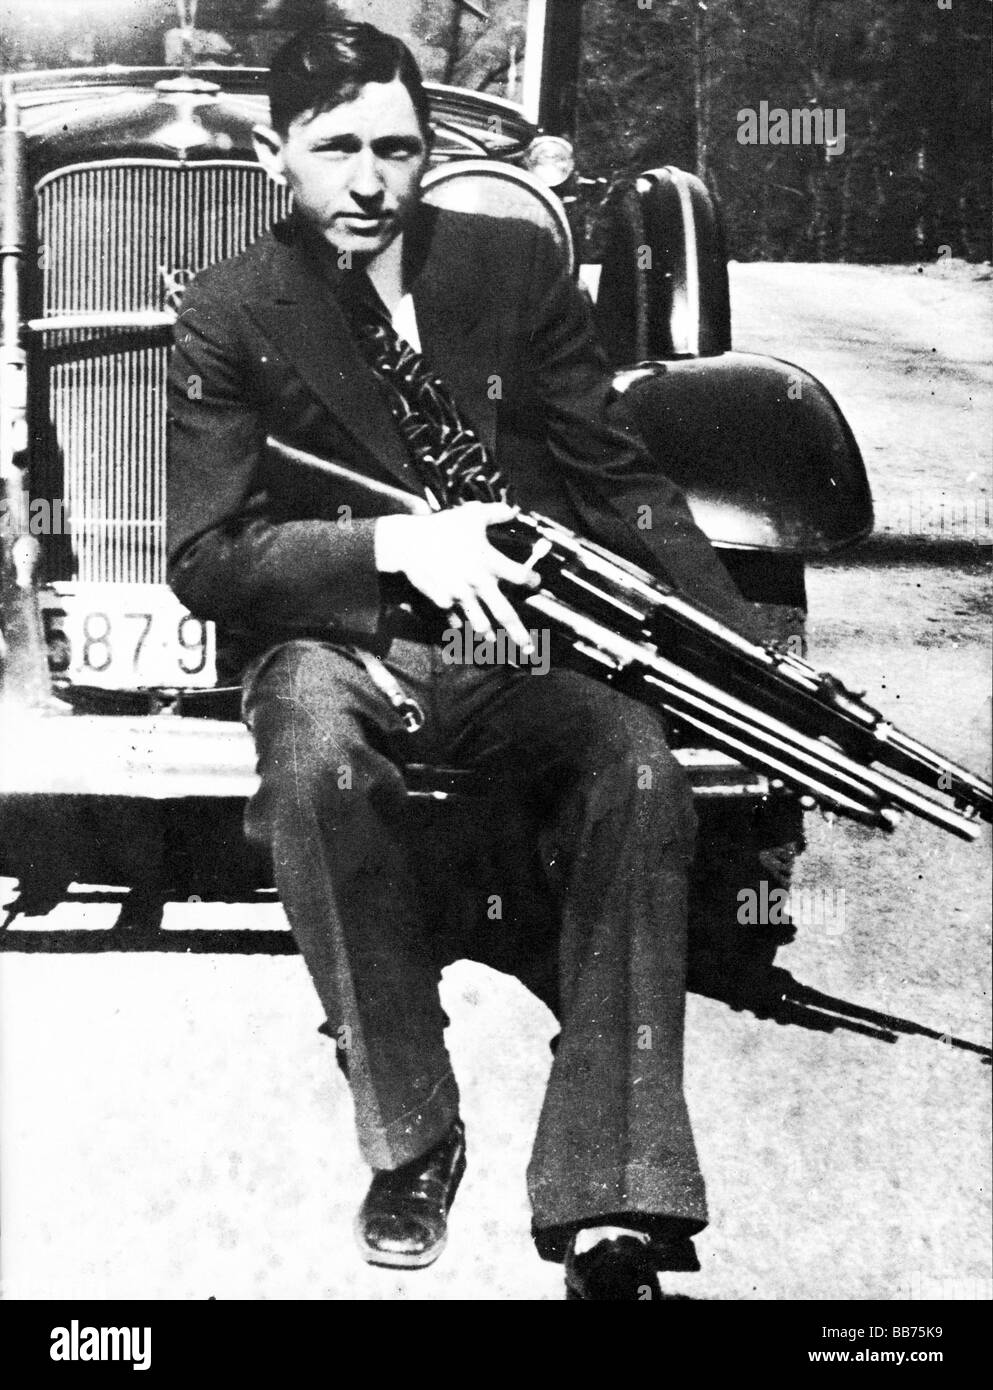 Clyde Barrow 1933 photo of the infamous outlaw and his car taken by Bonnie Parker while they were on the run Stock Photo